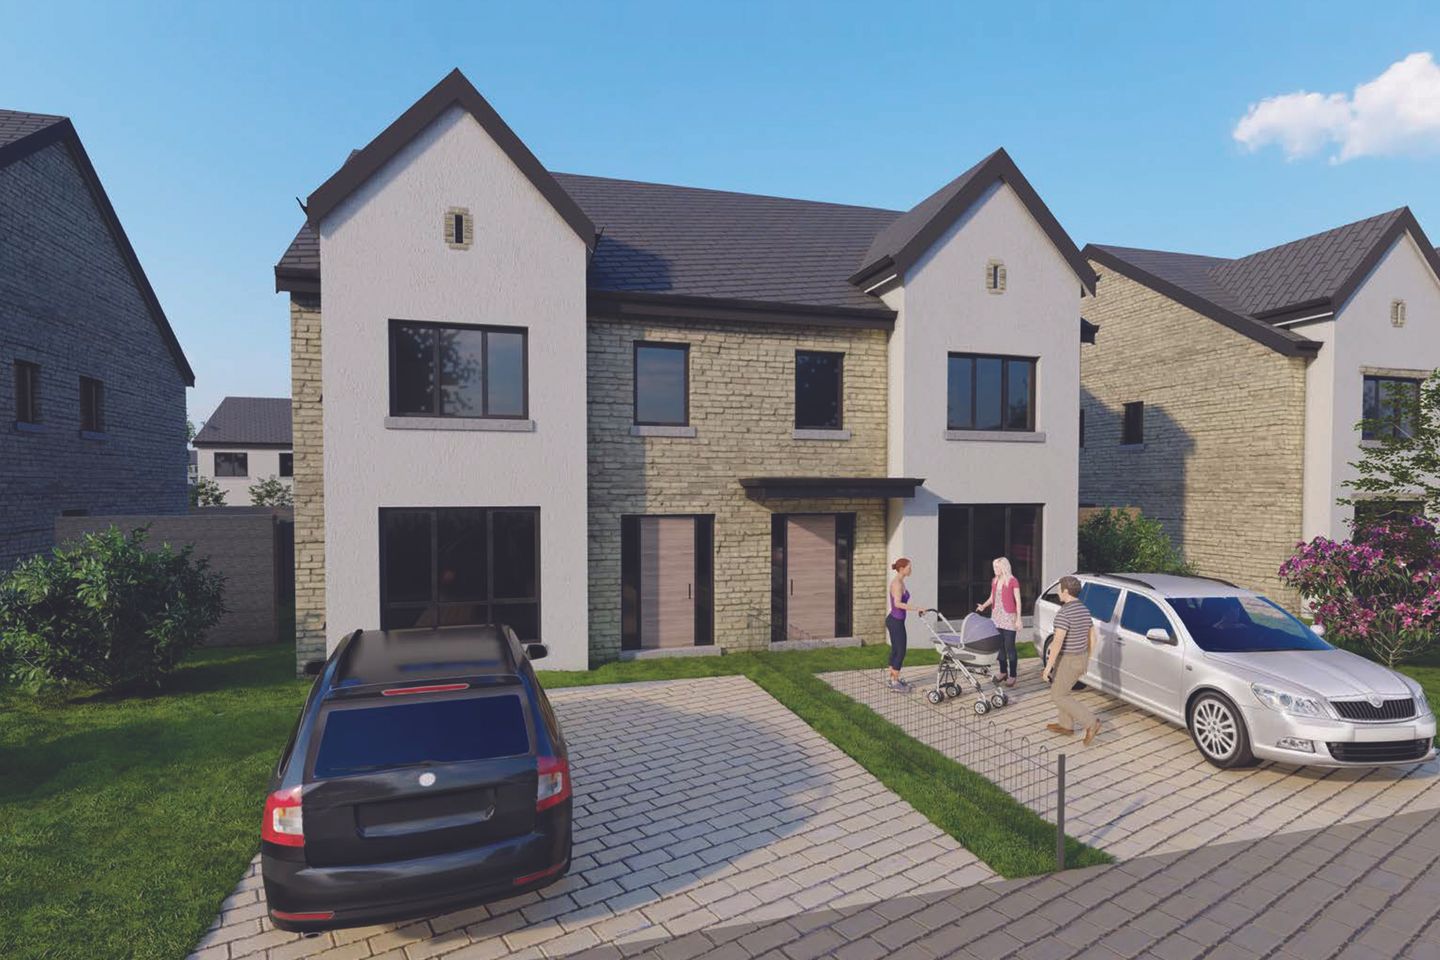 4 Bedroom Semi Detached , Rosefield, Rosefield , Tipperary Town, Co. Tipperary